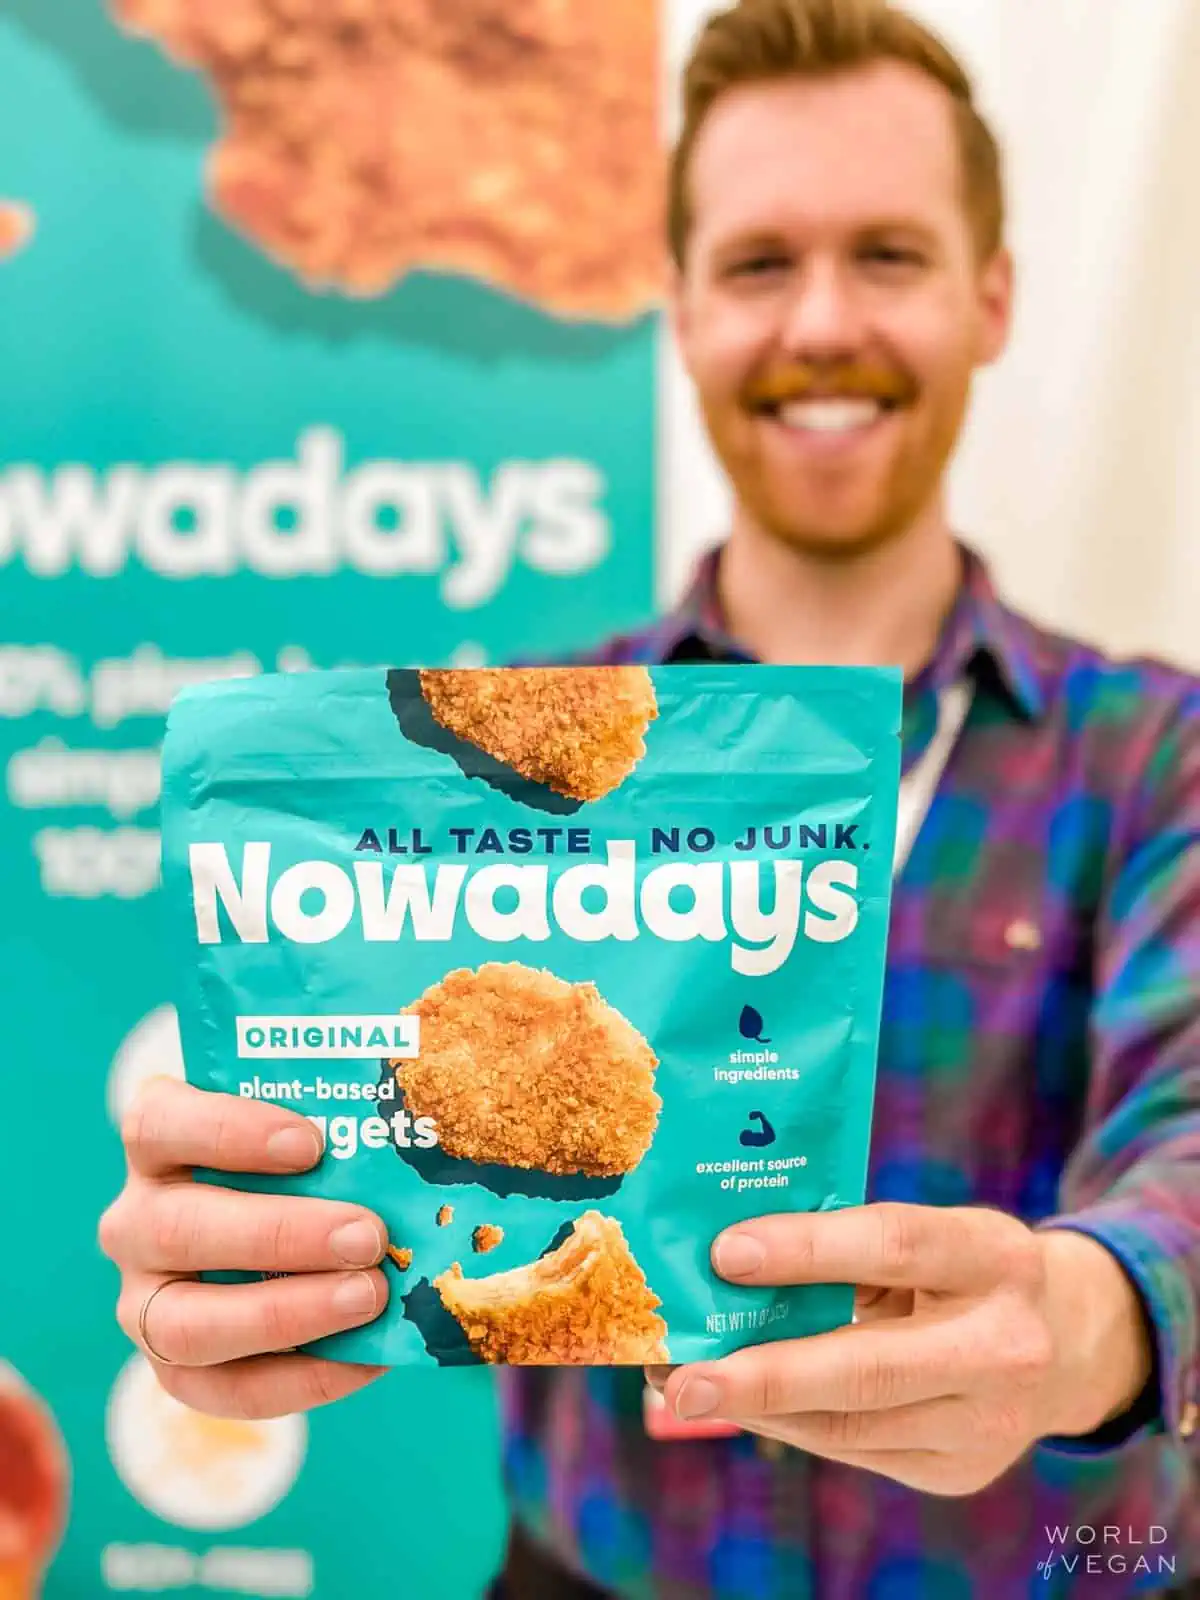 A person holding a bag of Nowadays plant-based chicken nuggets.